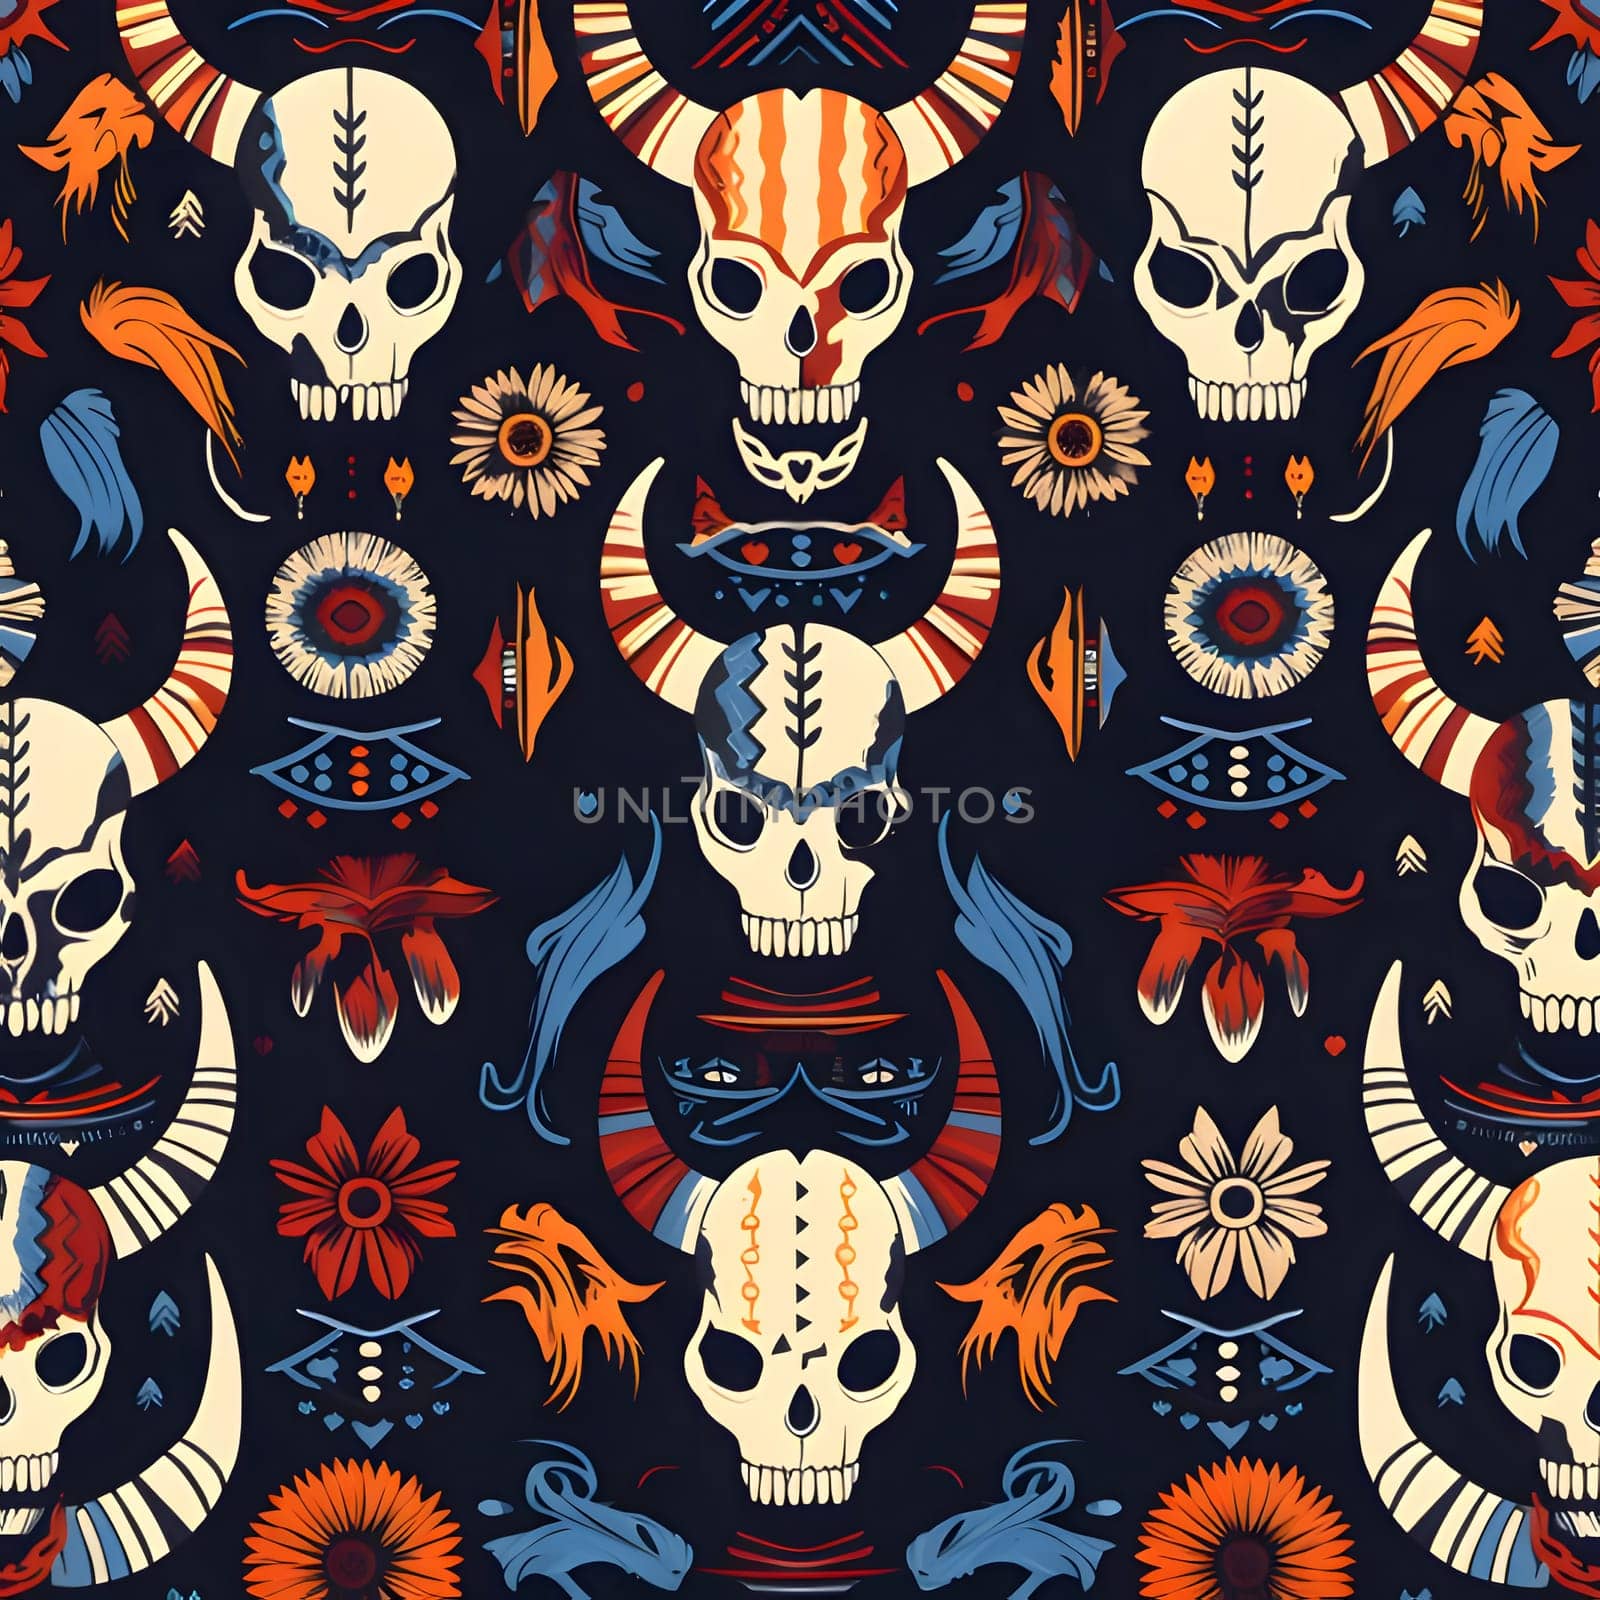 Patterns and banners backgrounds: Seamless pattern with tribal american skulls. Vector illustration.